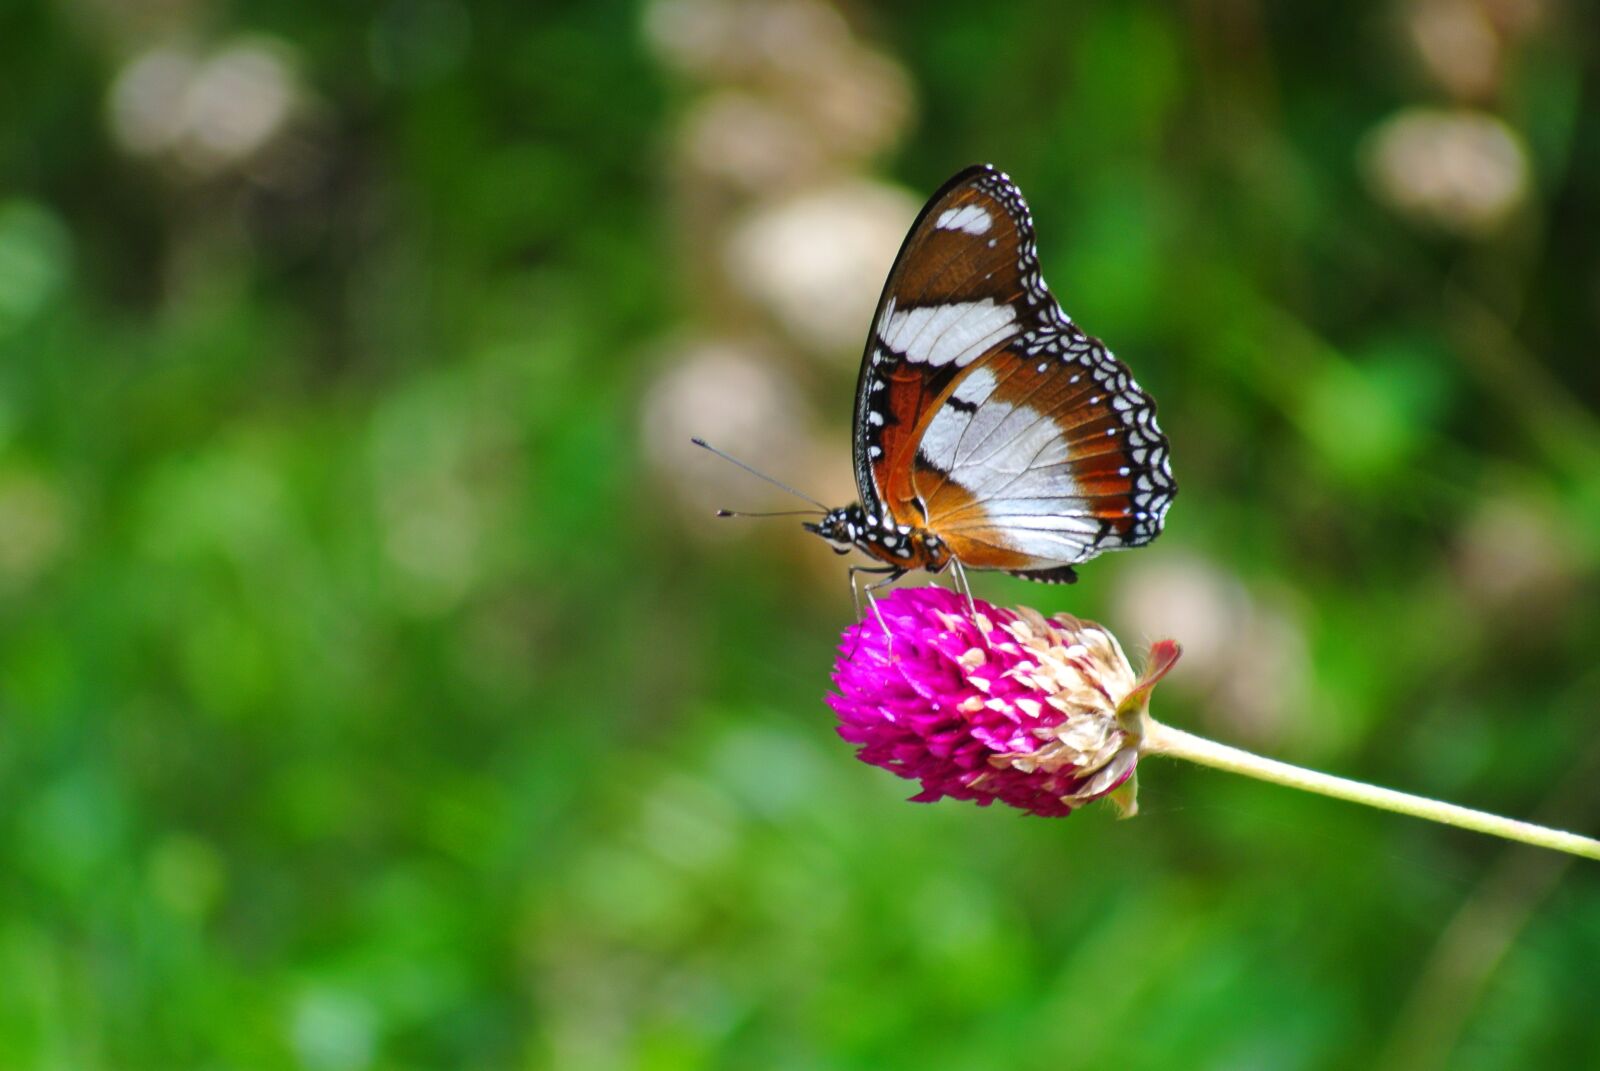 Nikon 1 V1 sample photo. Flowers, insects, butterfly photography